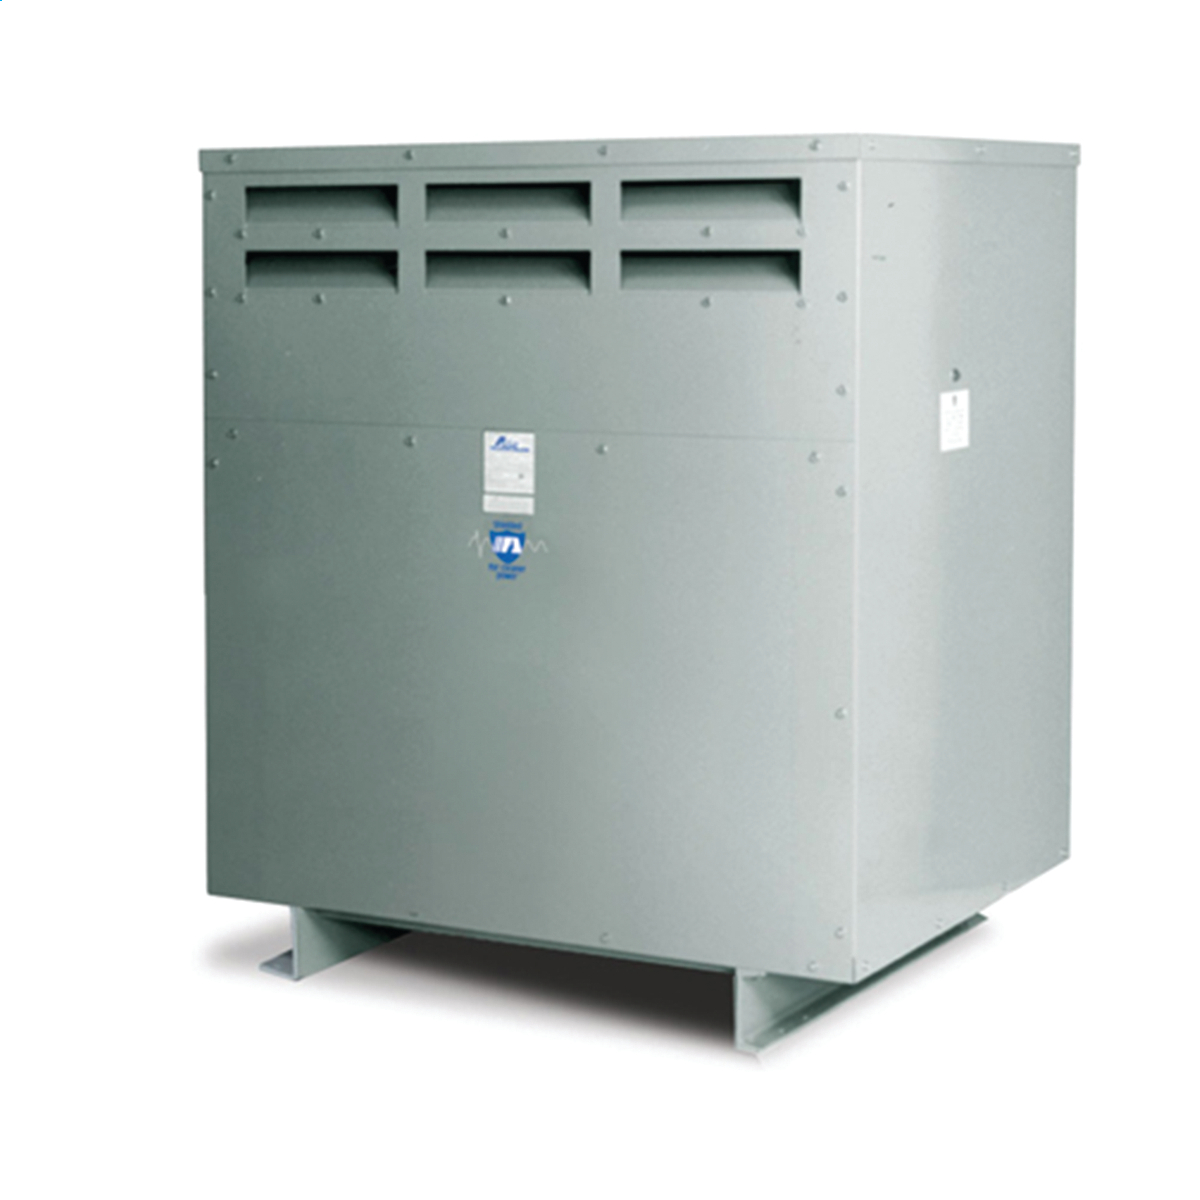 Electrical product information - TFMR 3PH 750KVA 2400-480Y277 :  ElectricSmarts Network